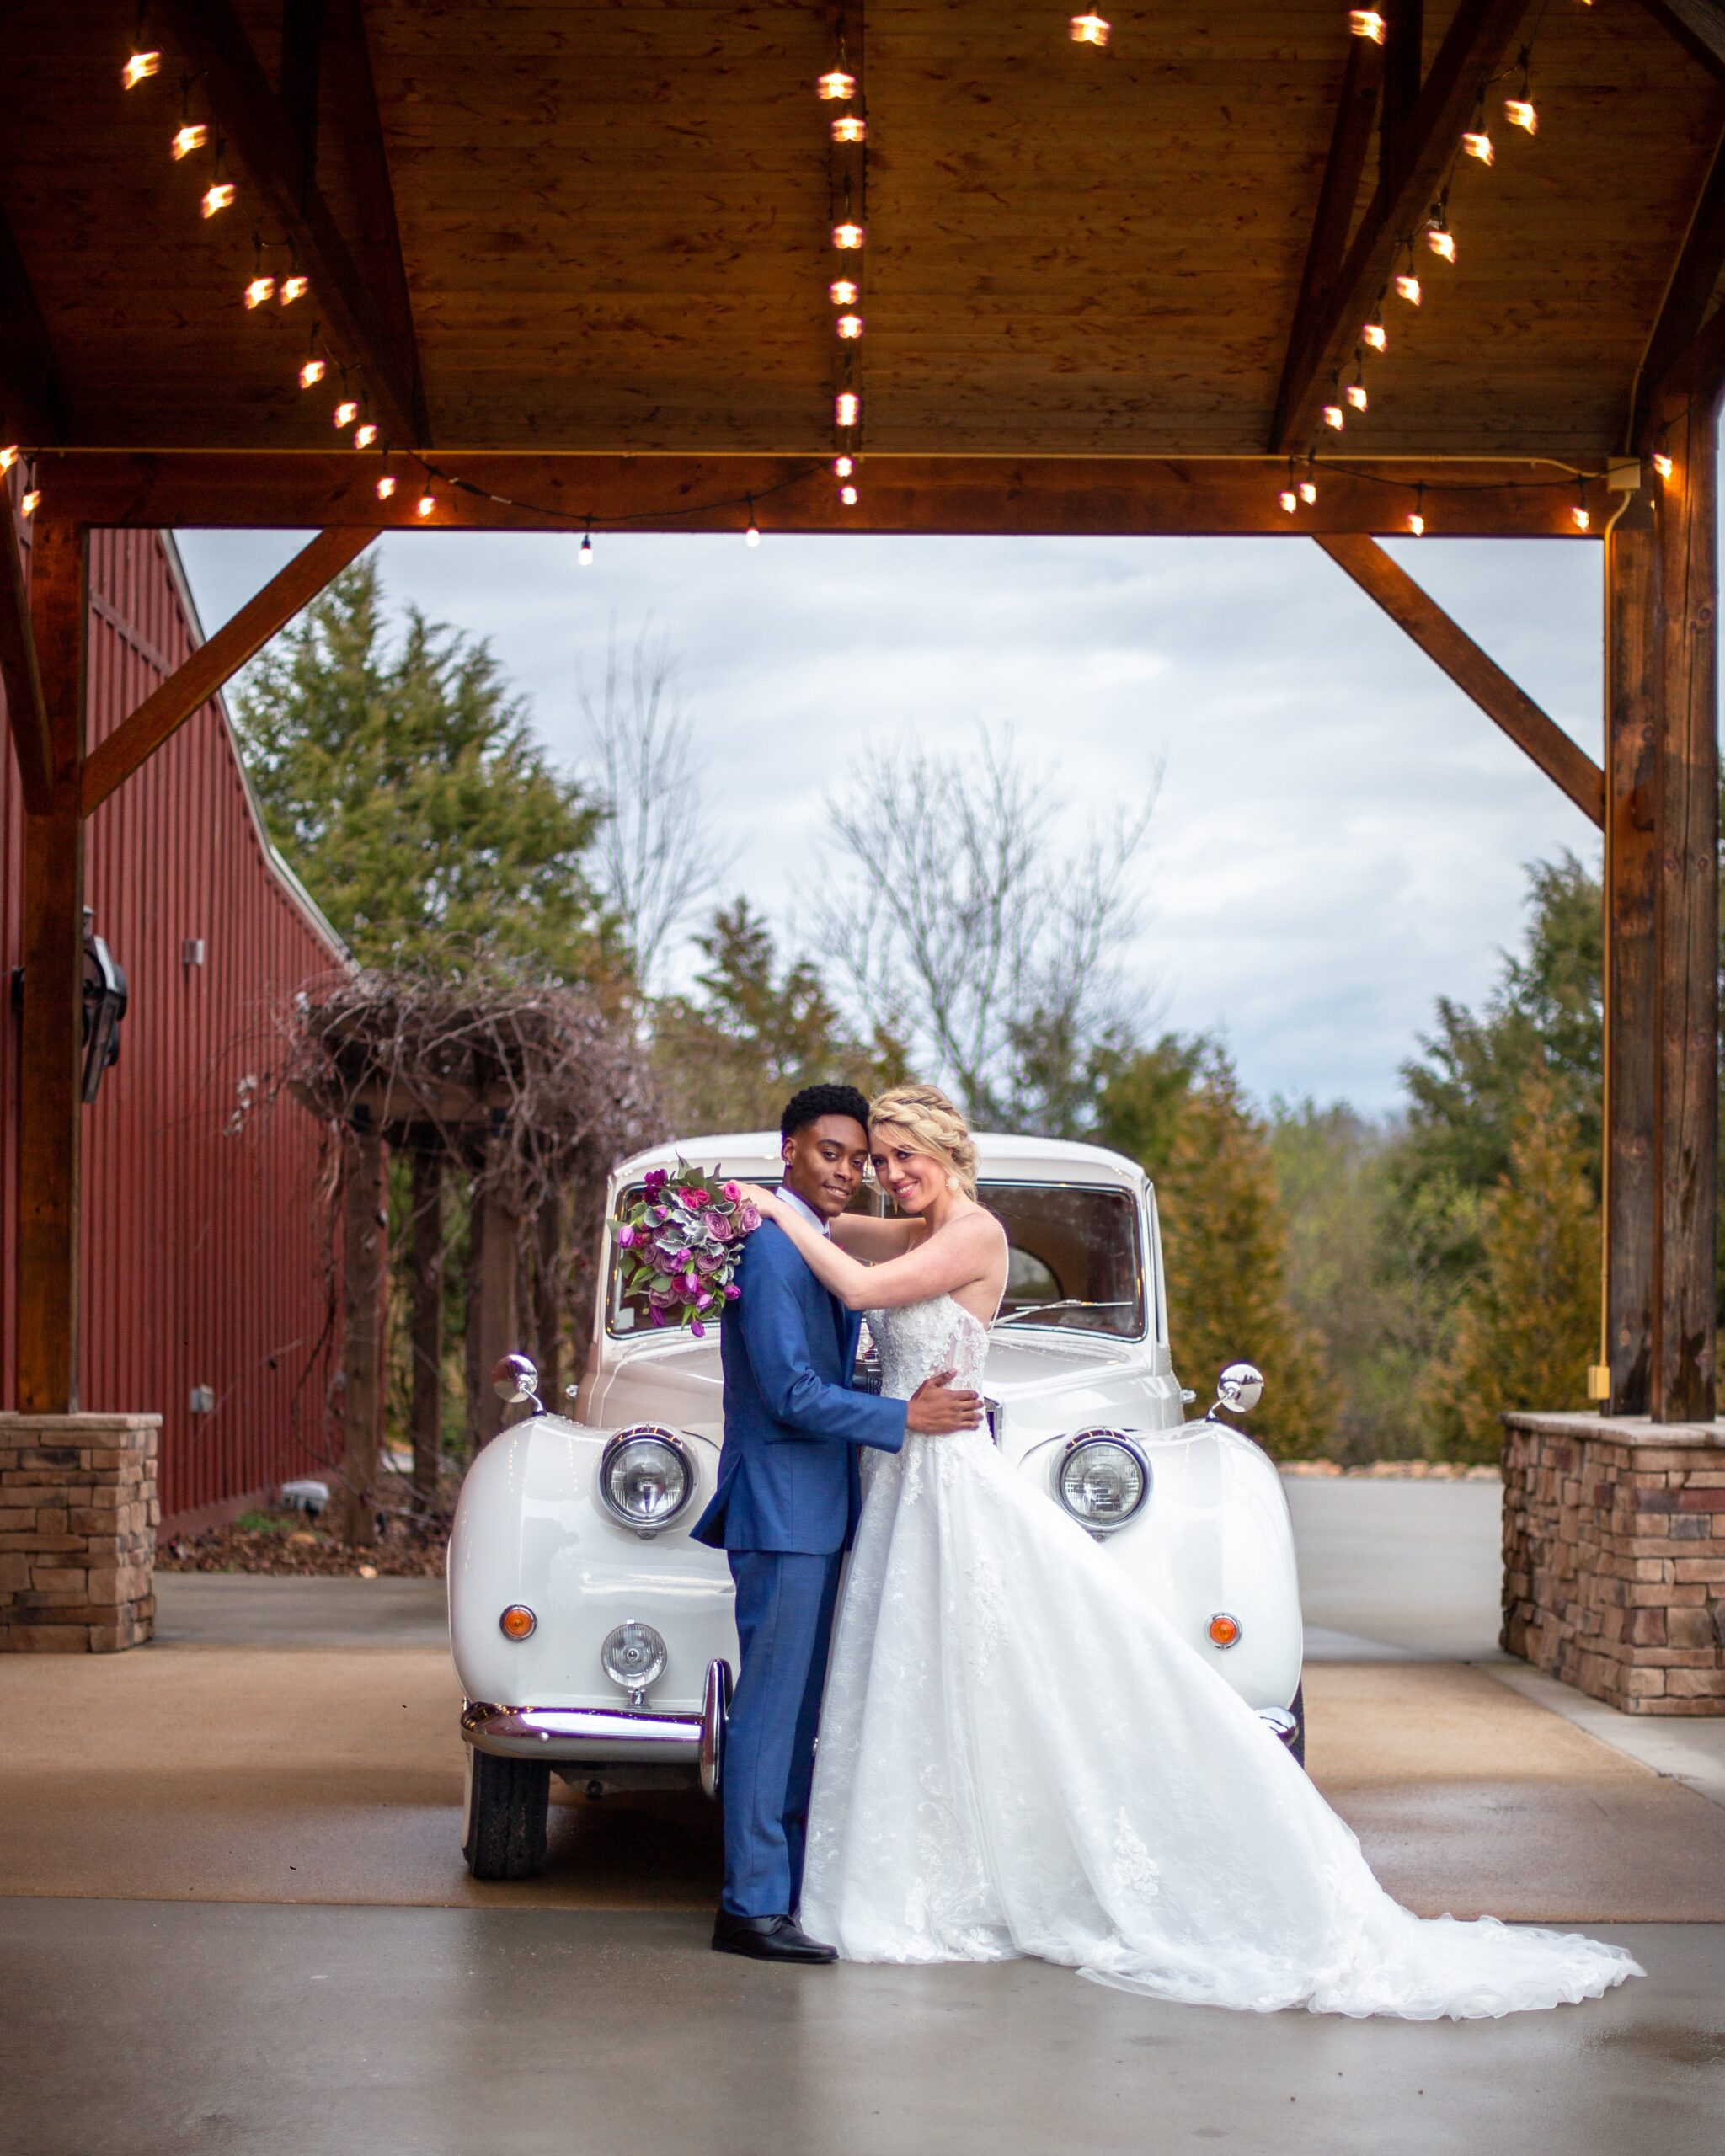 A happy couple posing with an antique car at The Vineyard Hall - A Rustic Wedding Venue